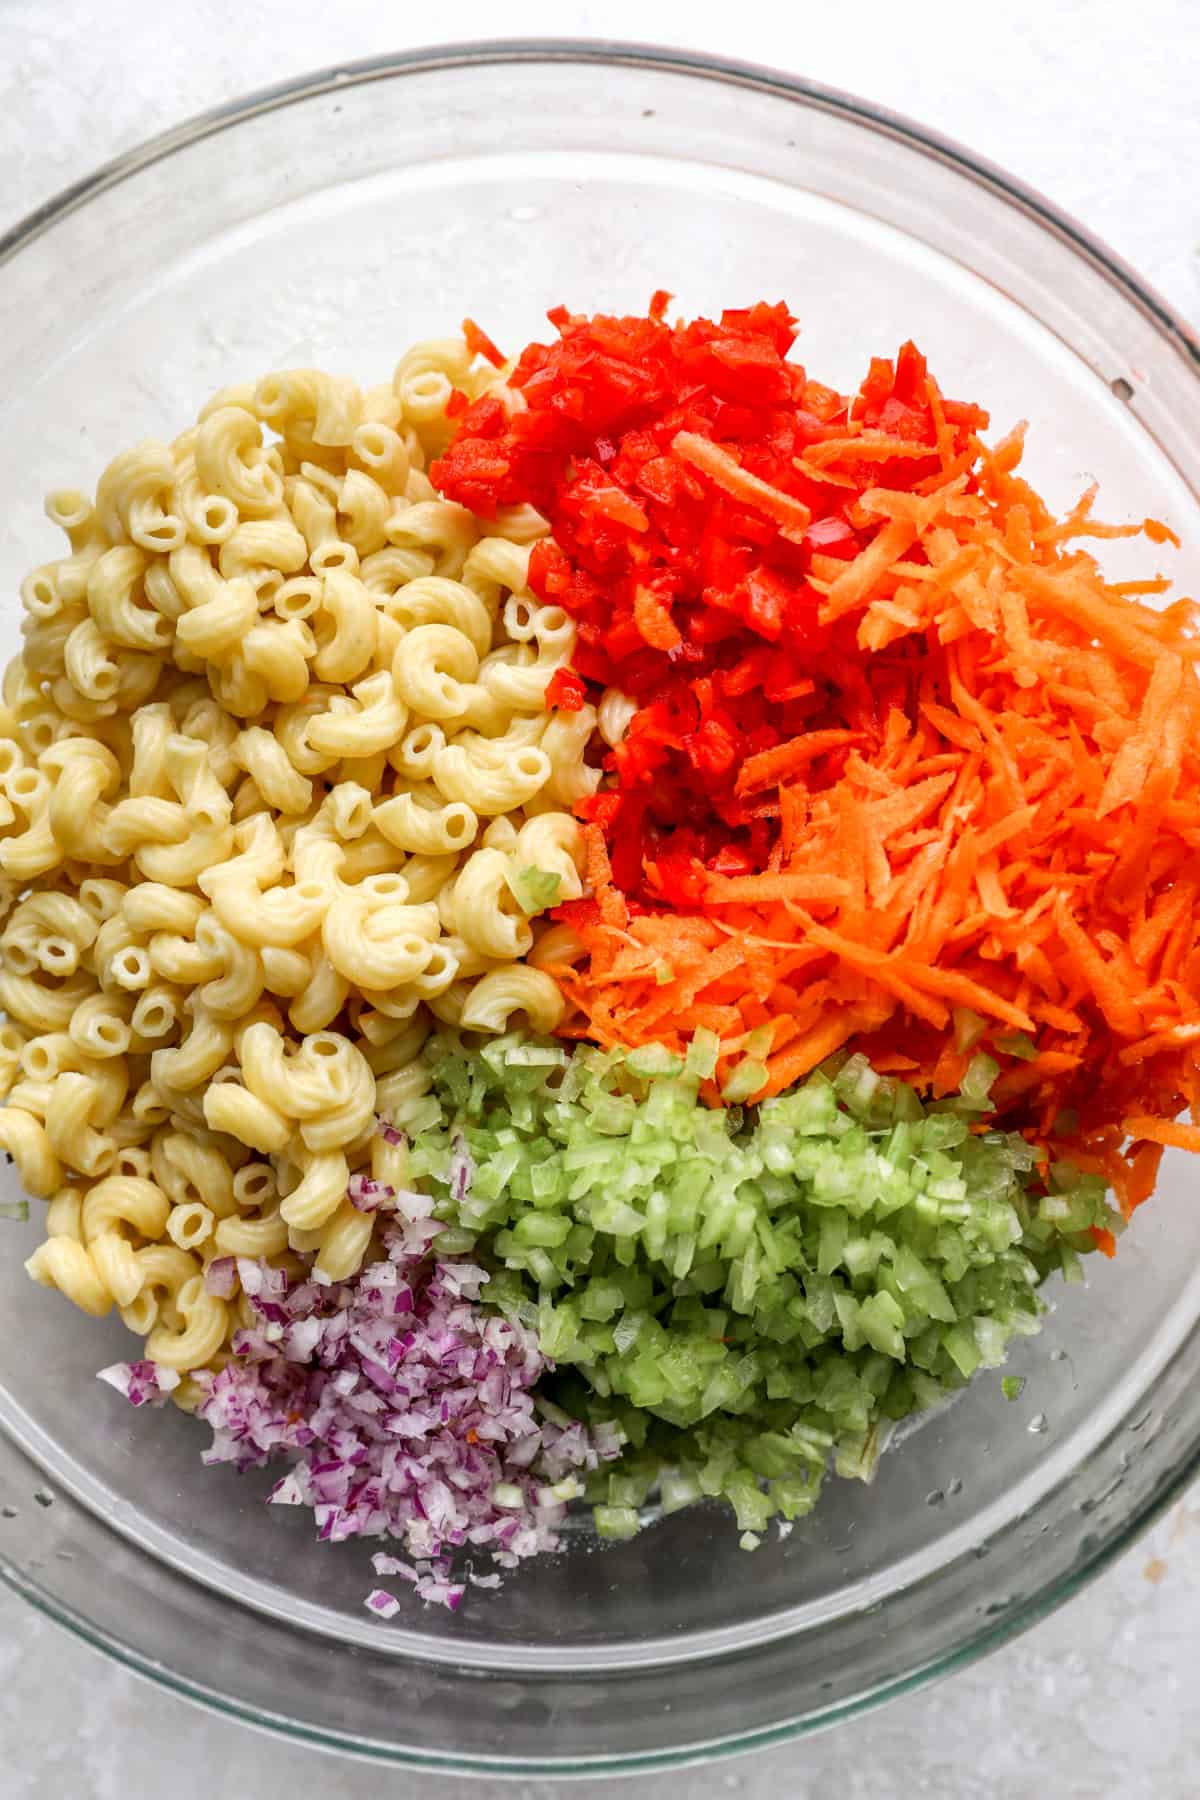 ingredients for pasta salad in a bowl from above.